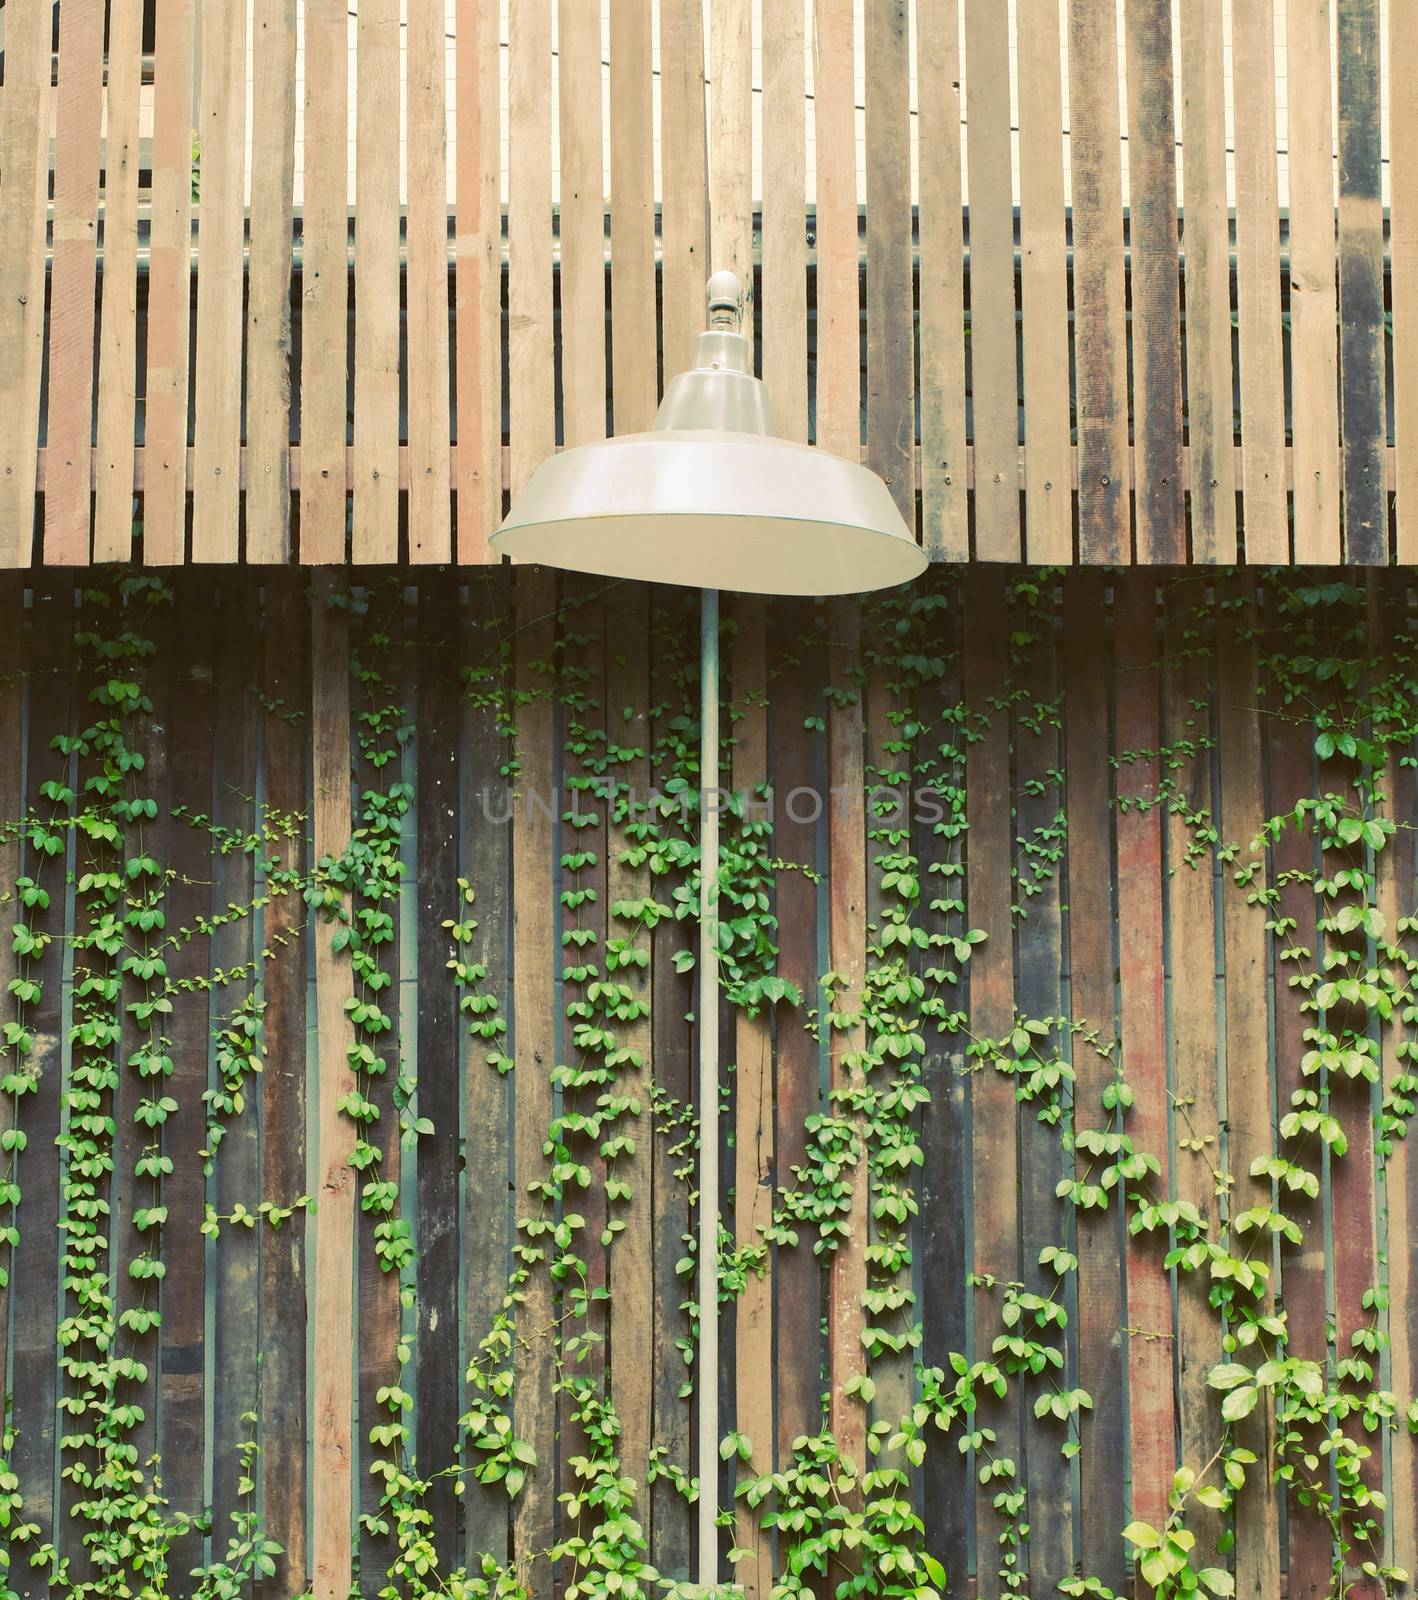 Old lamp hanging outdoor with wooden wall and ivy plant by nuchylee